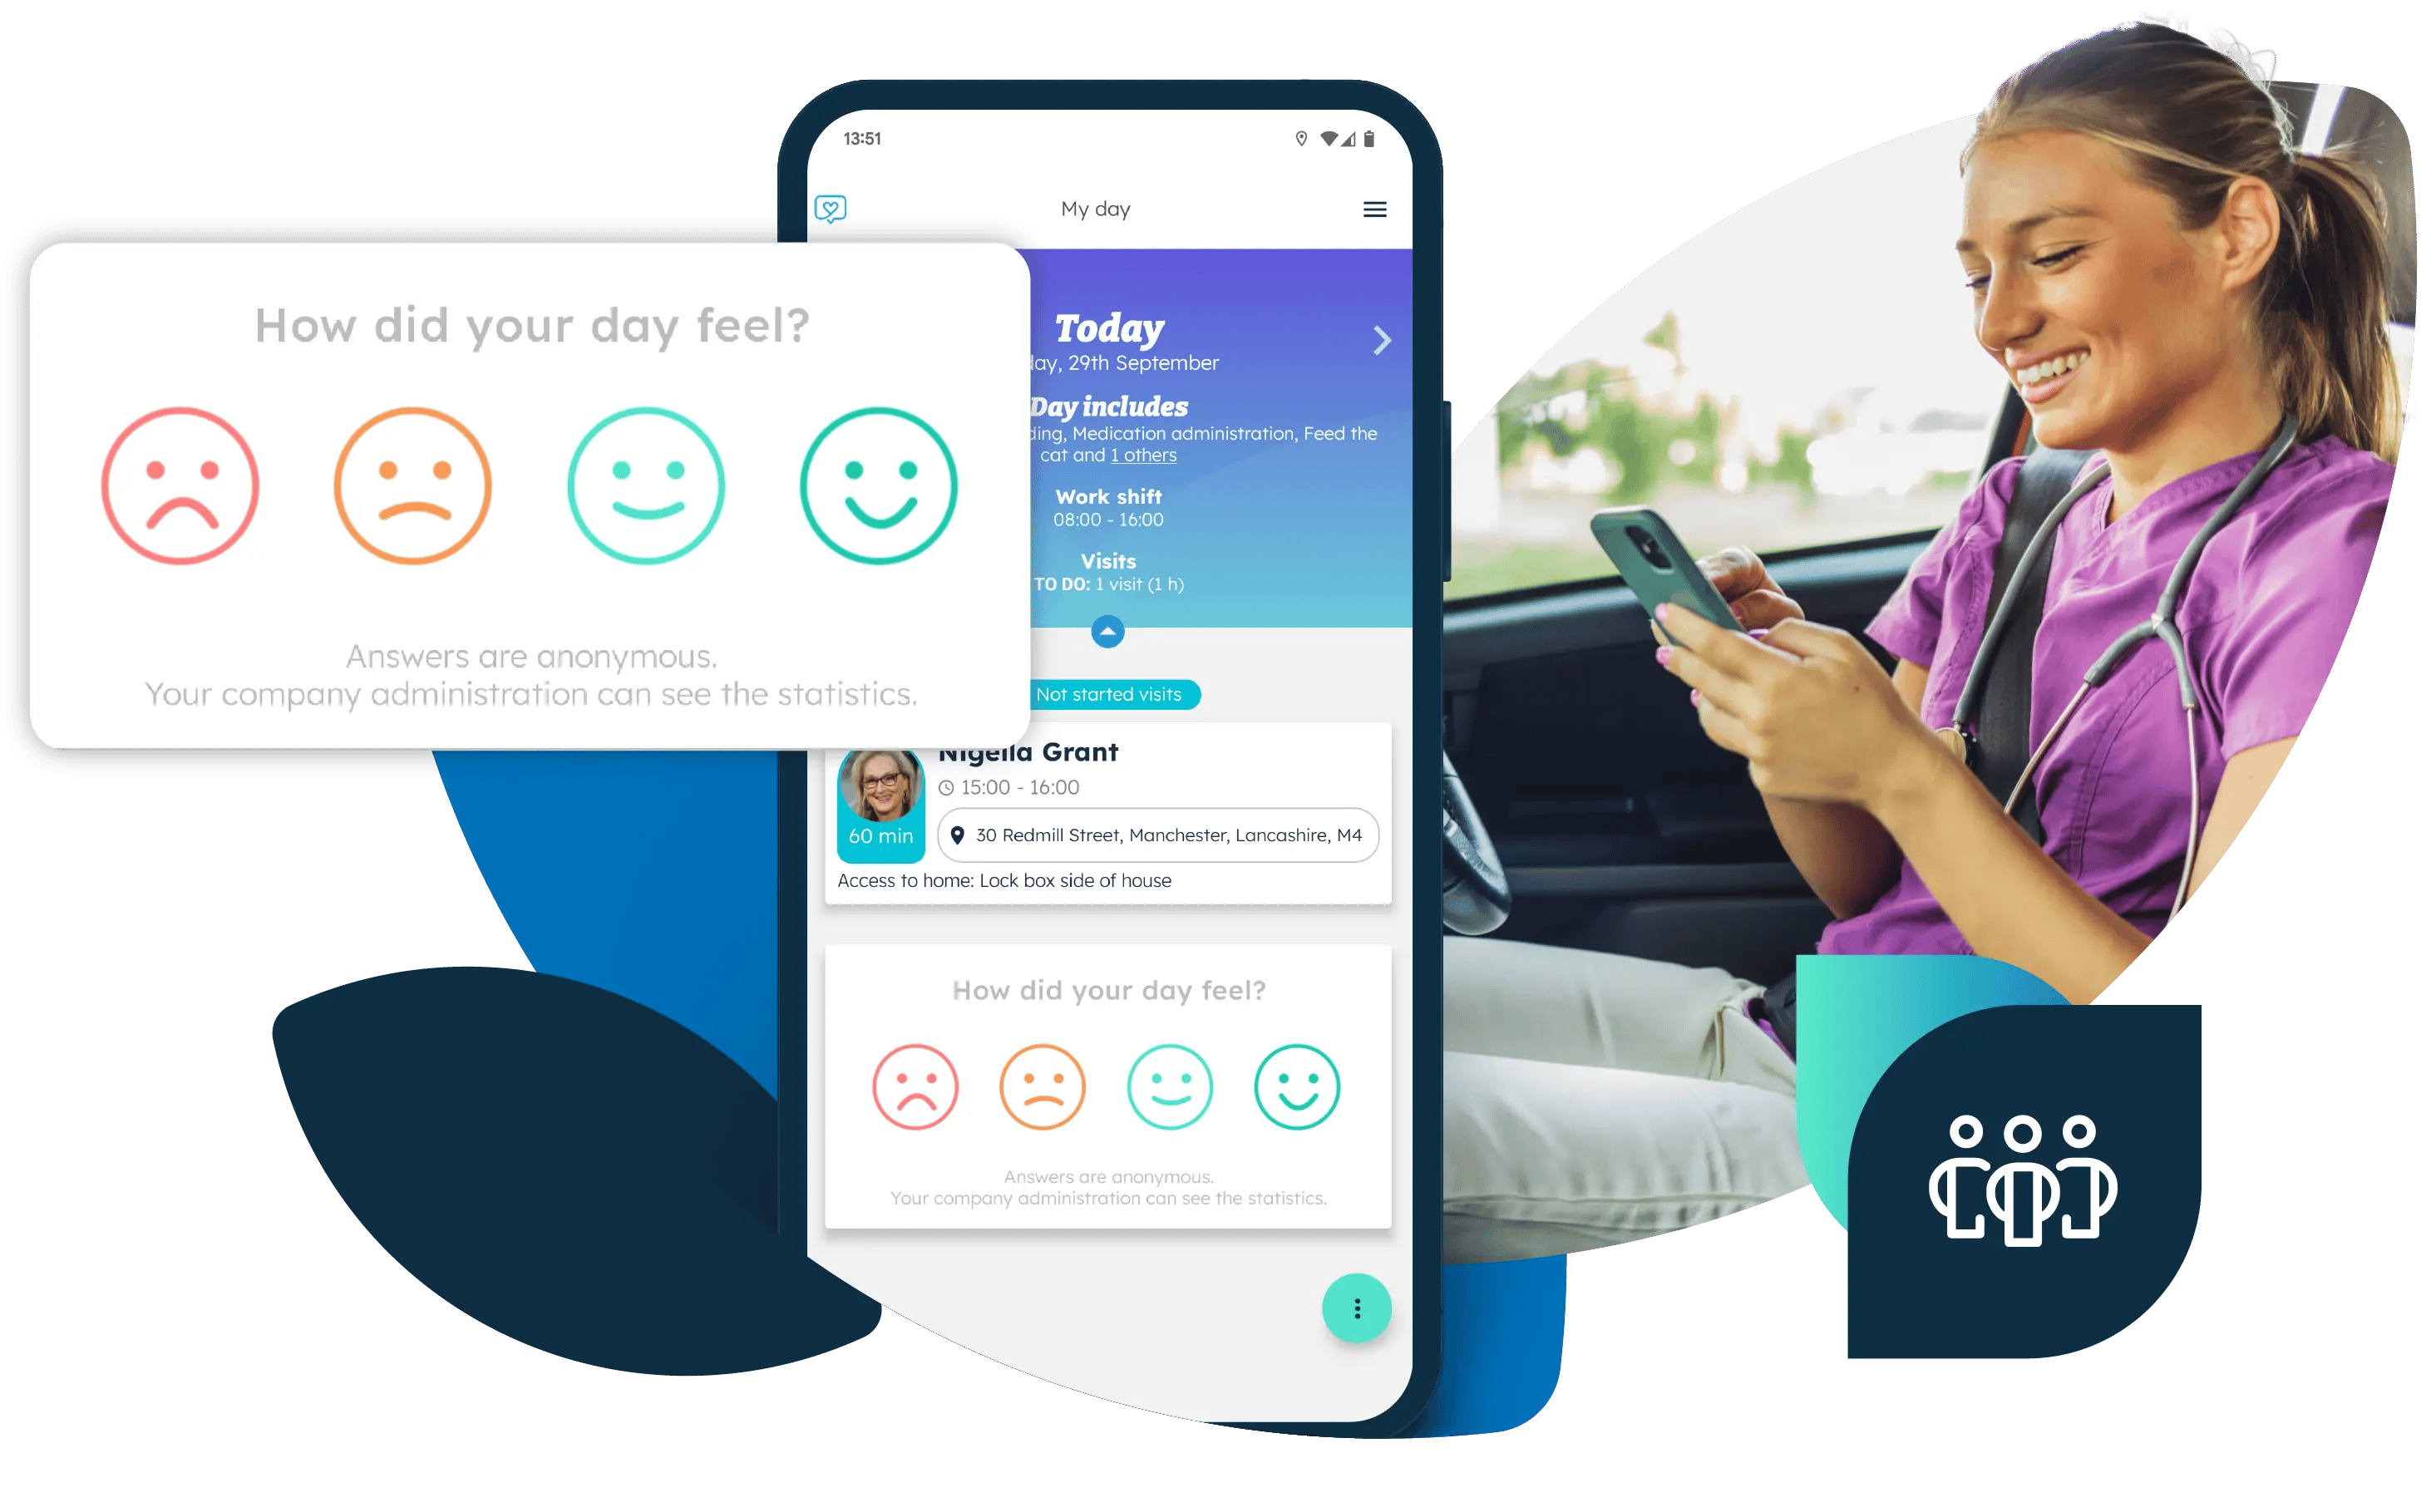 A smiling carer using a mobile phone in her car, plus a wellbeing survey displayed on the Nursebuddy mobile app